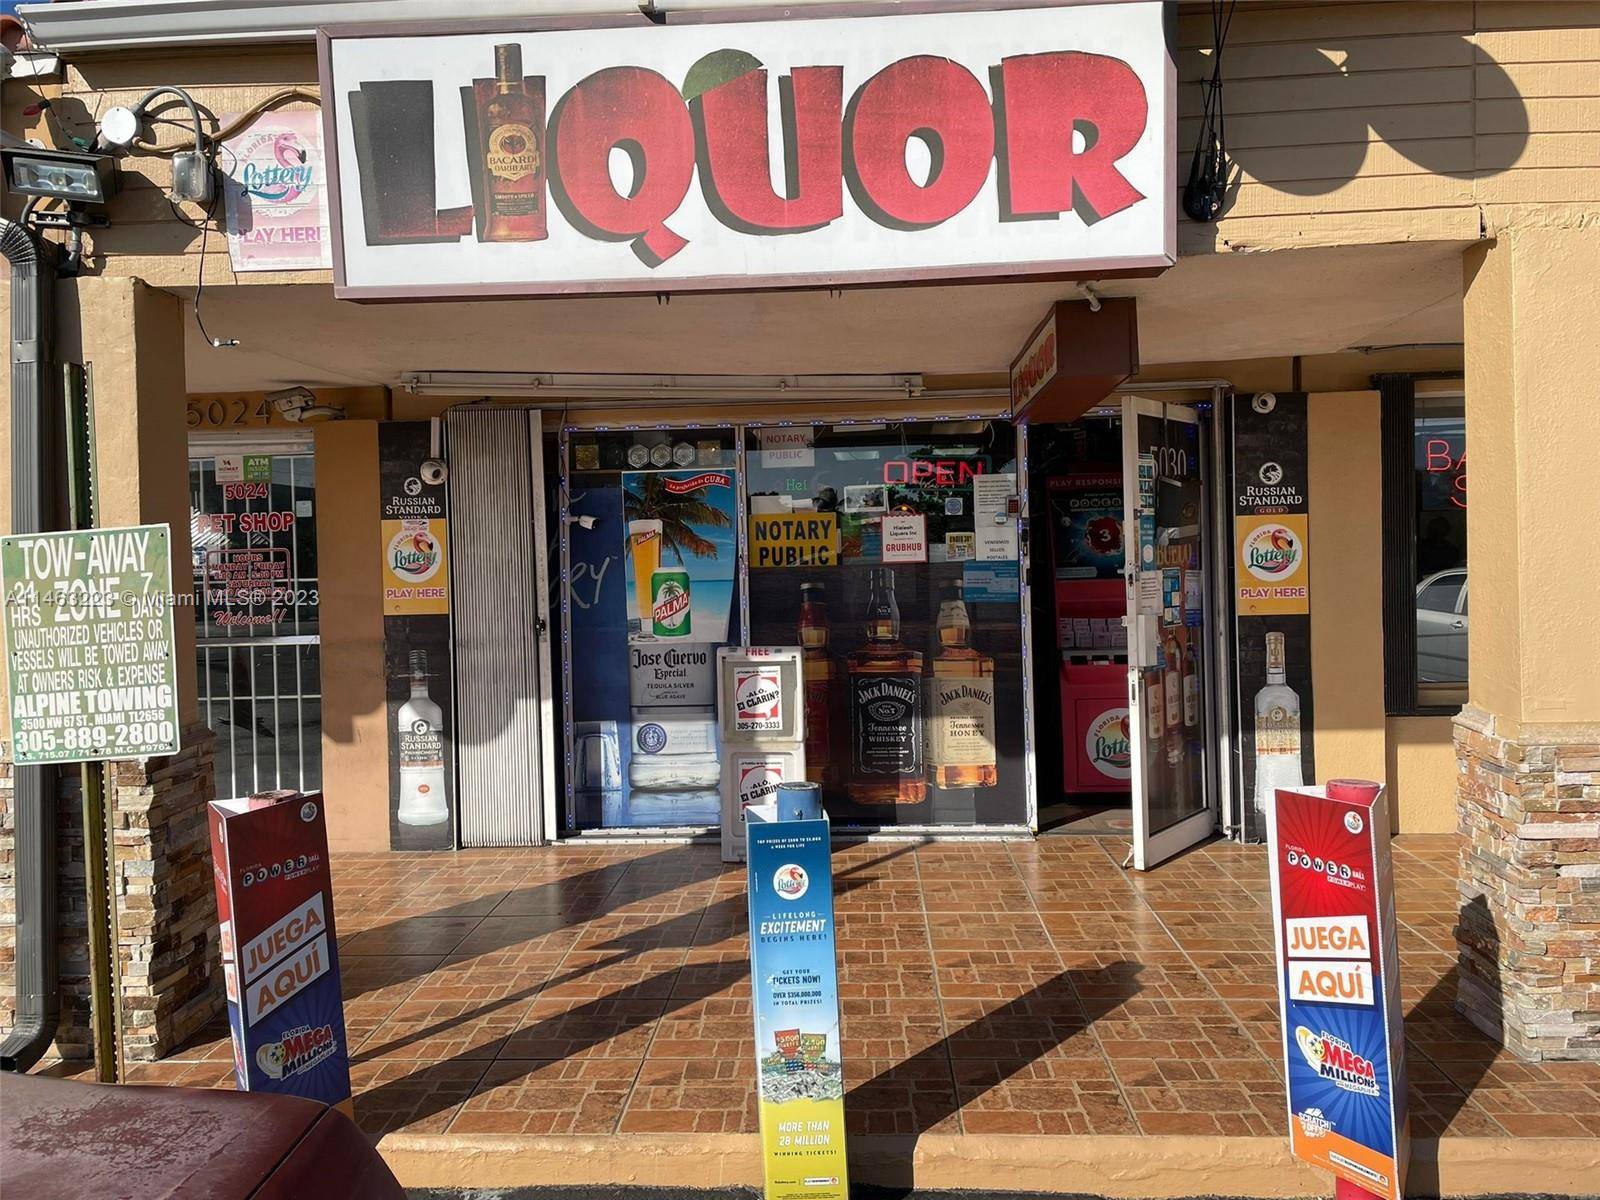 Established retail liquor store 38 years in business, Great Opportunity only no real estate included.